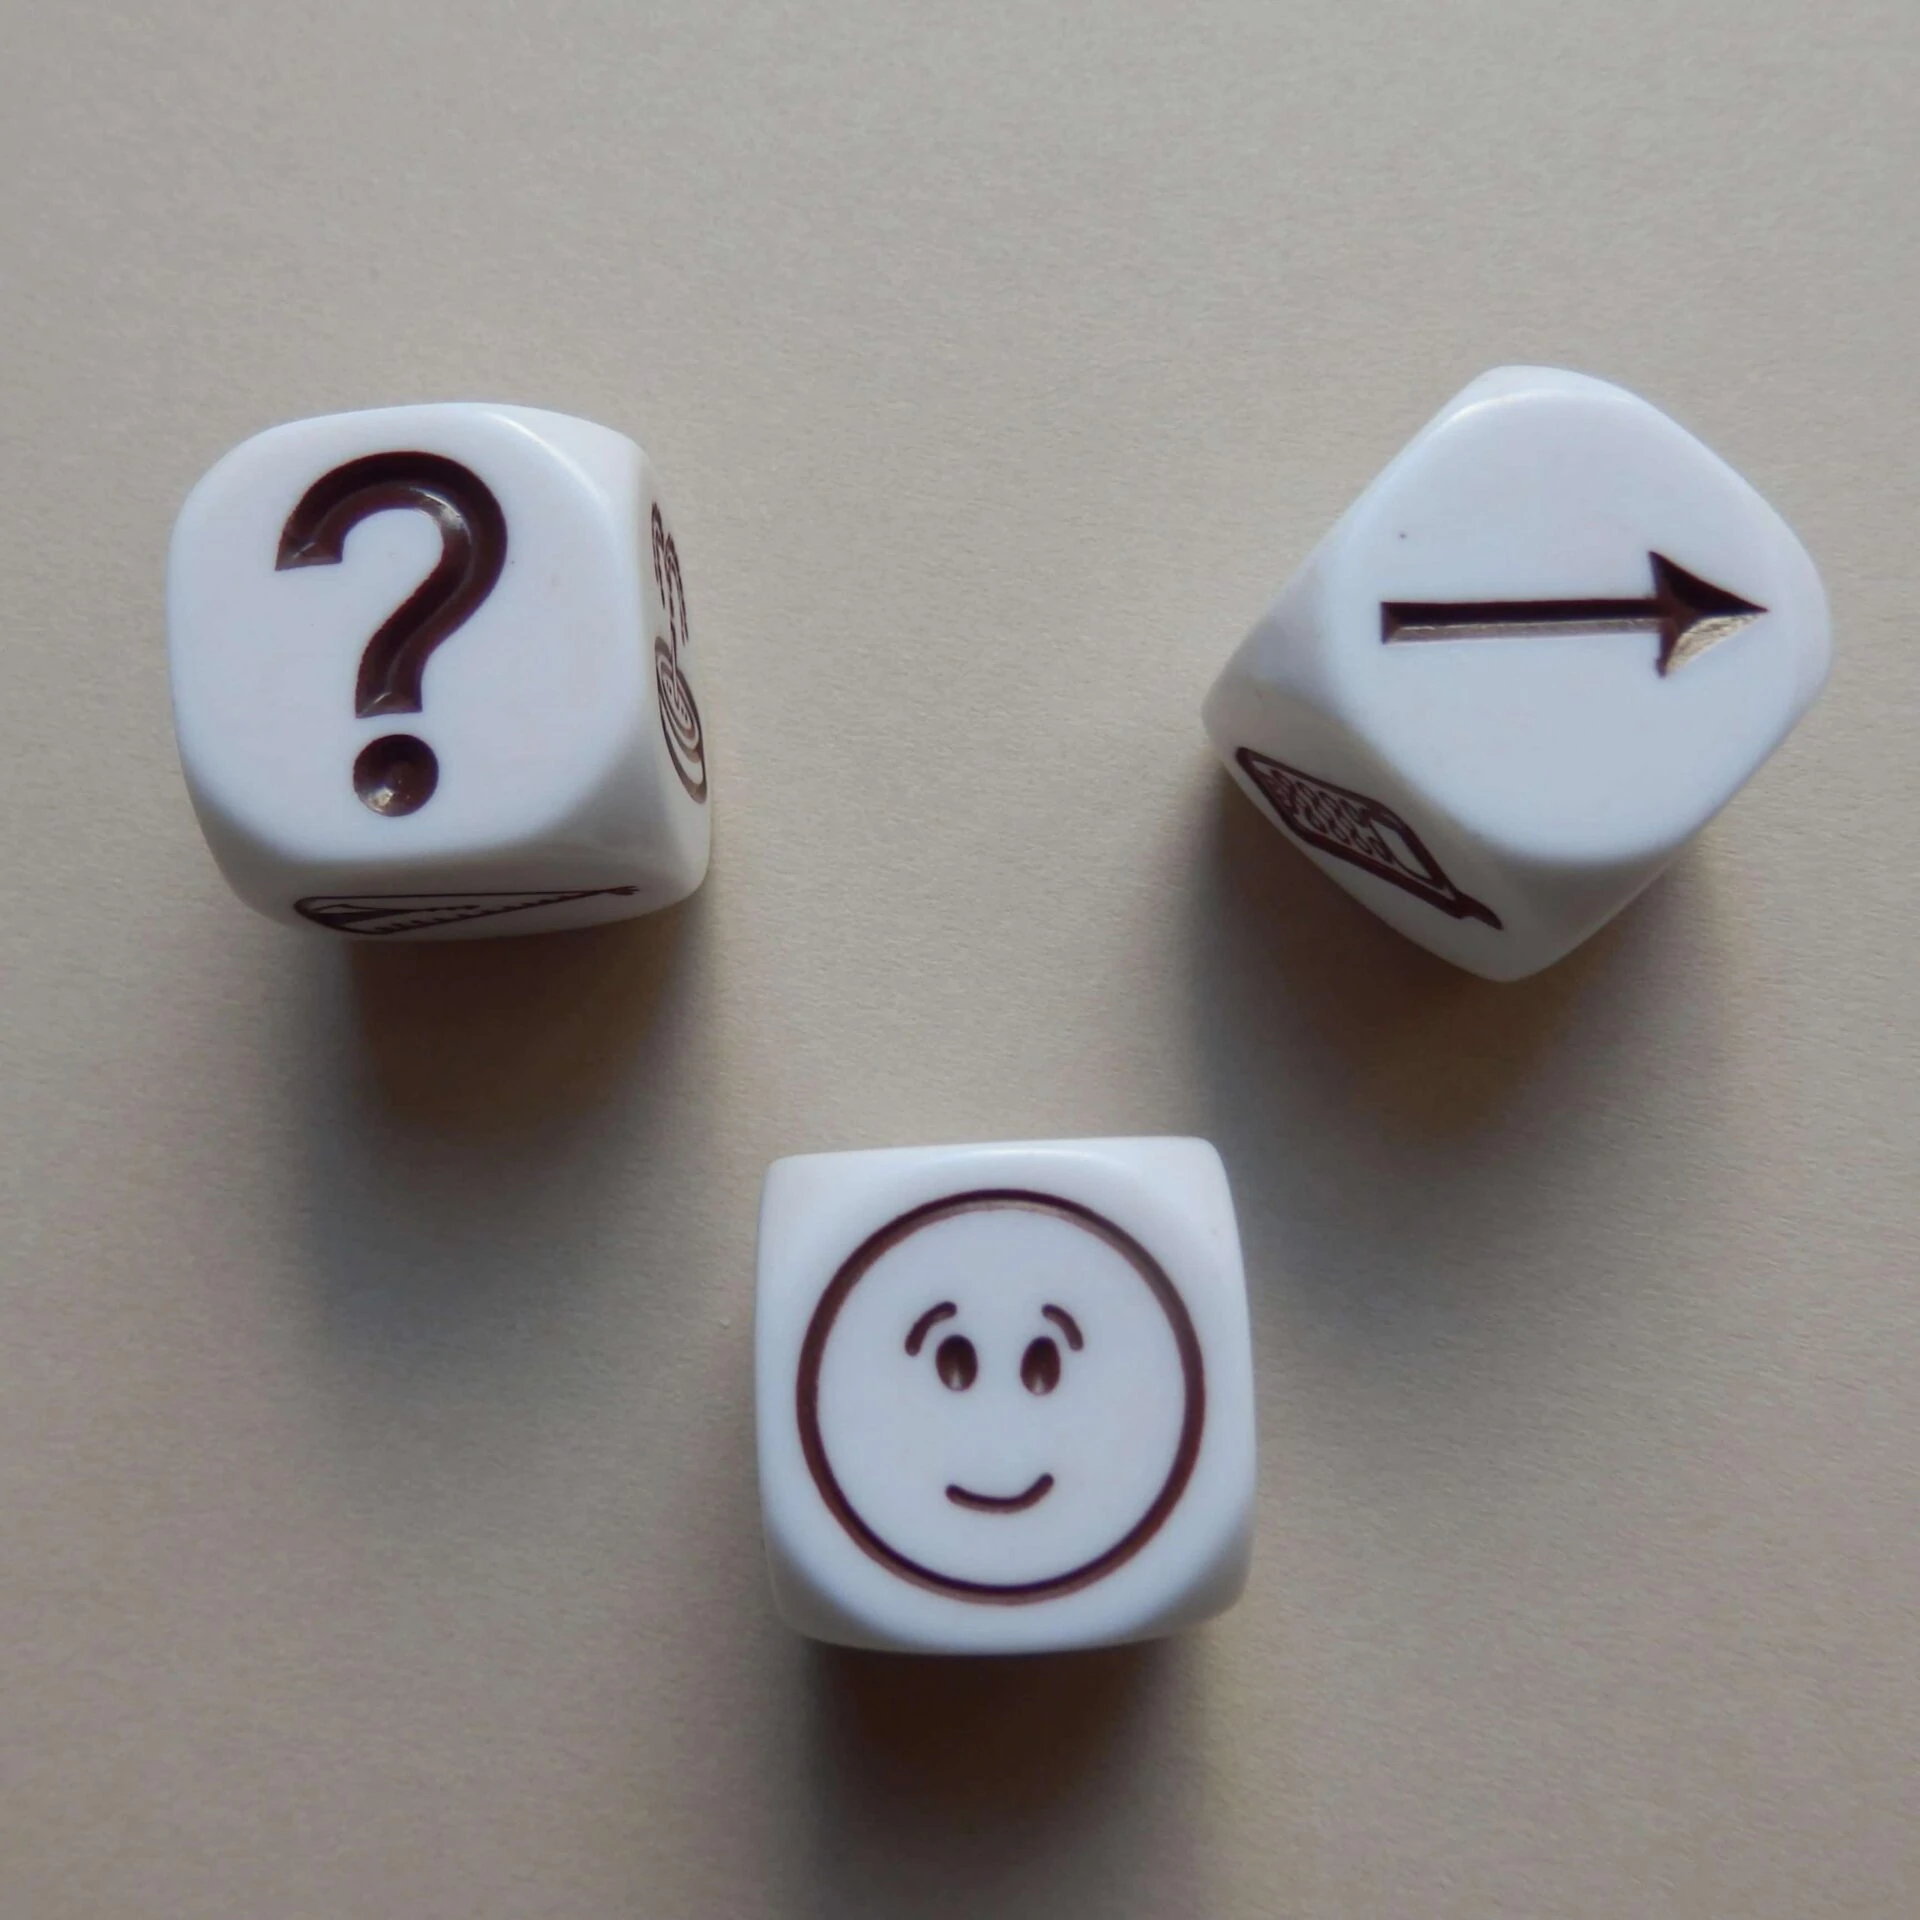 Three white cubes with one black icon each: a question mark, a smiley face and an arrow pointing to the right.